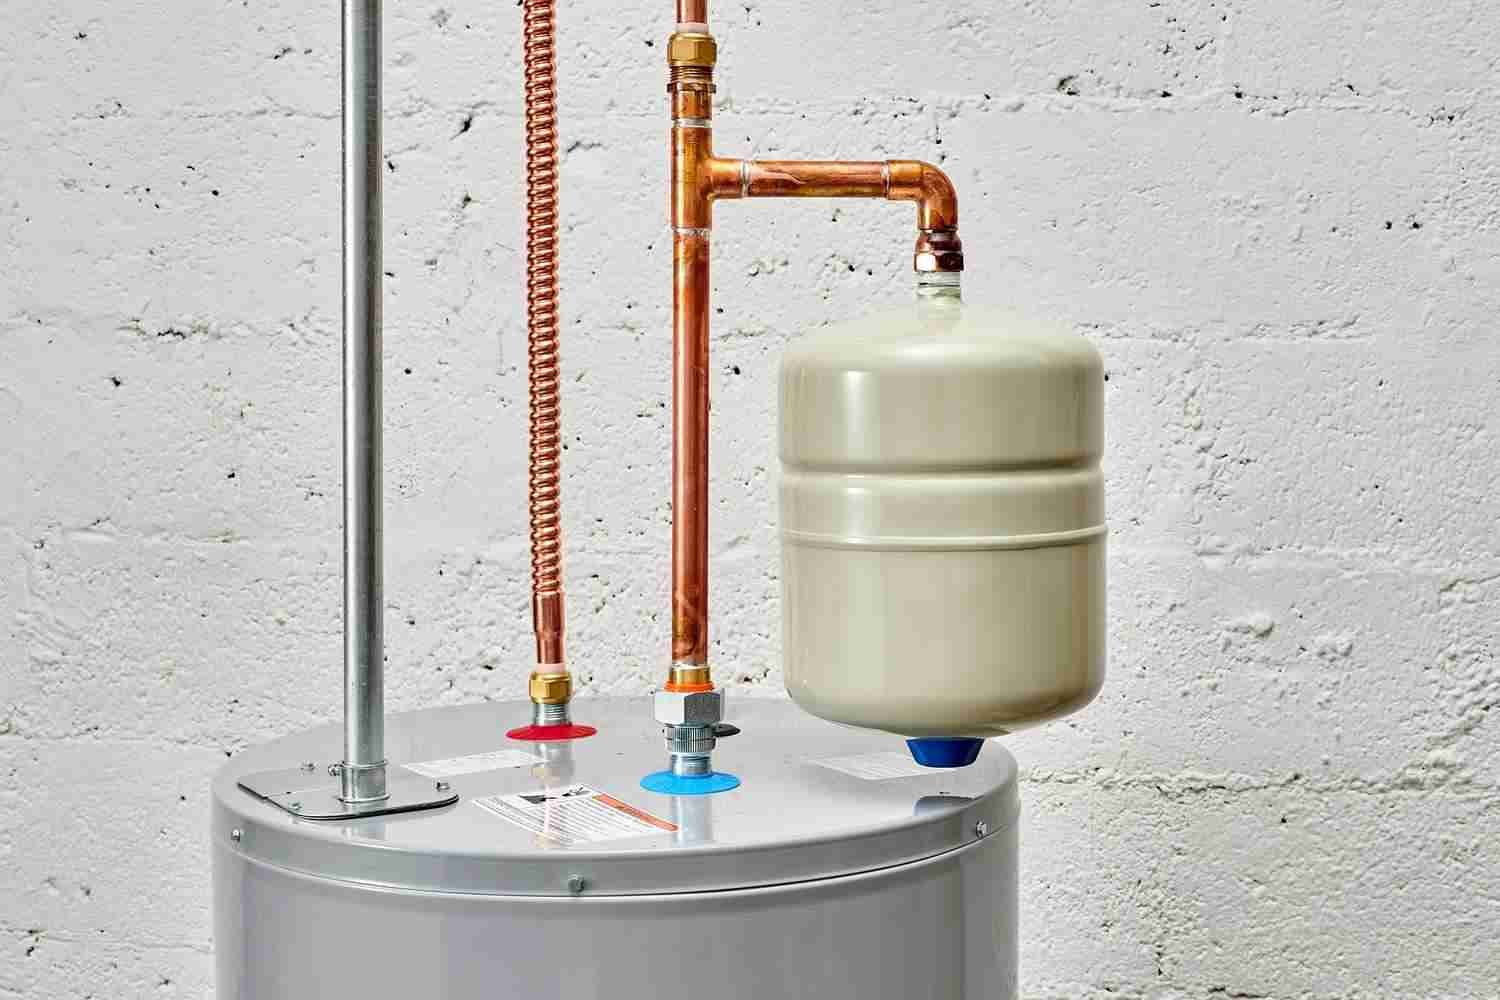 A close-up of a modern home water heater setup with copper piping and an expansion tank against a white brick wall.